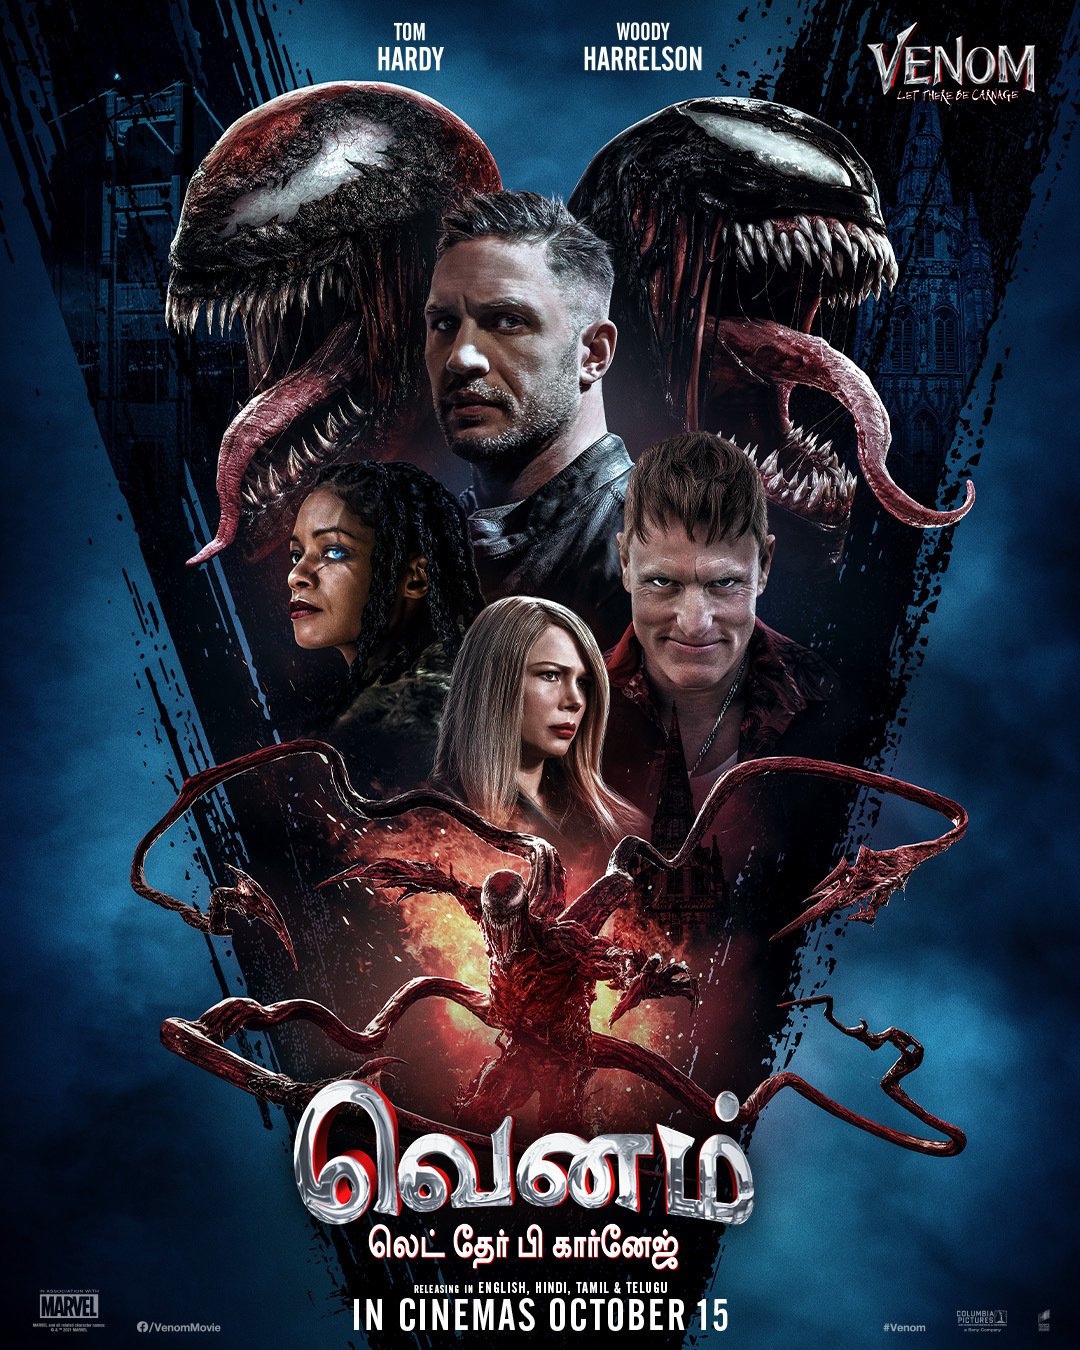 Venom 2: Let There Be Carnage (2021) HDRip tamil Full Movie Watch Online Free MovieRulz